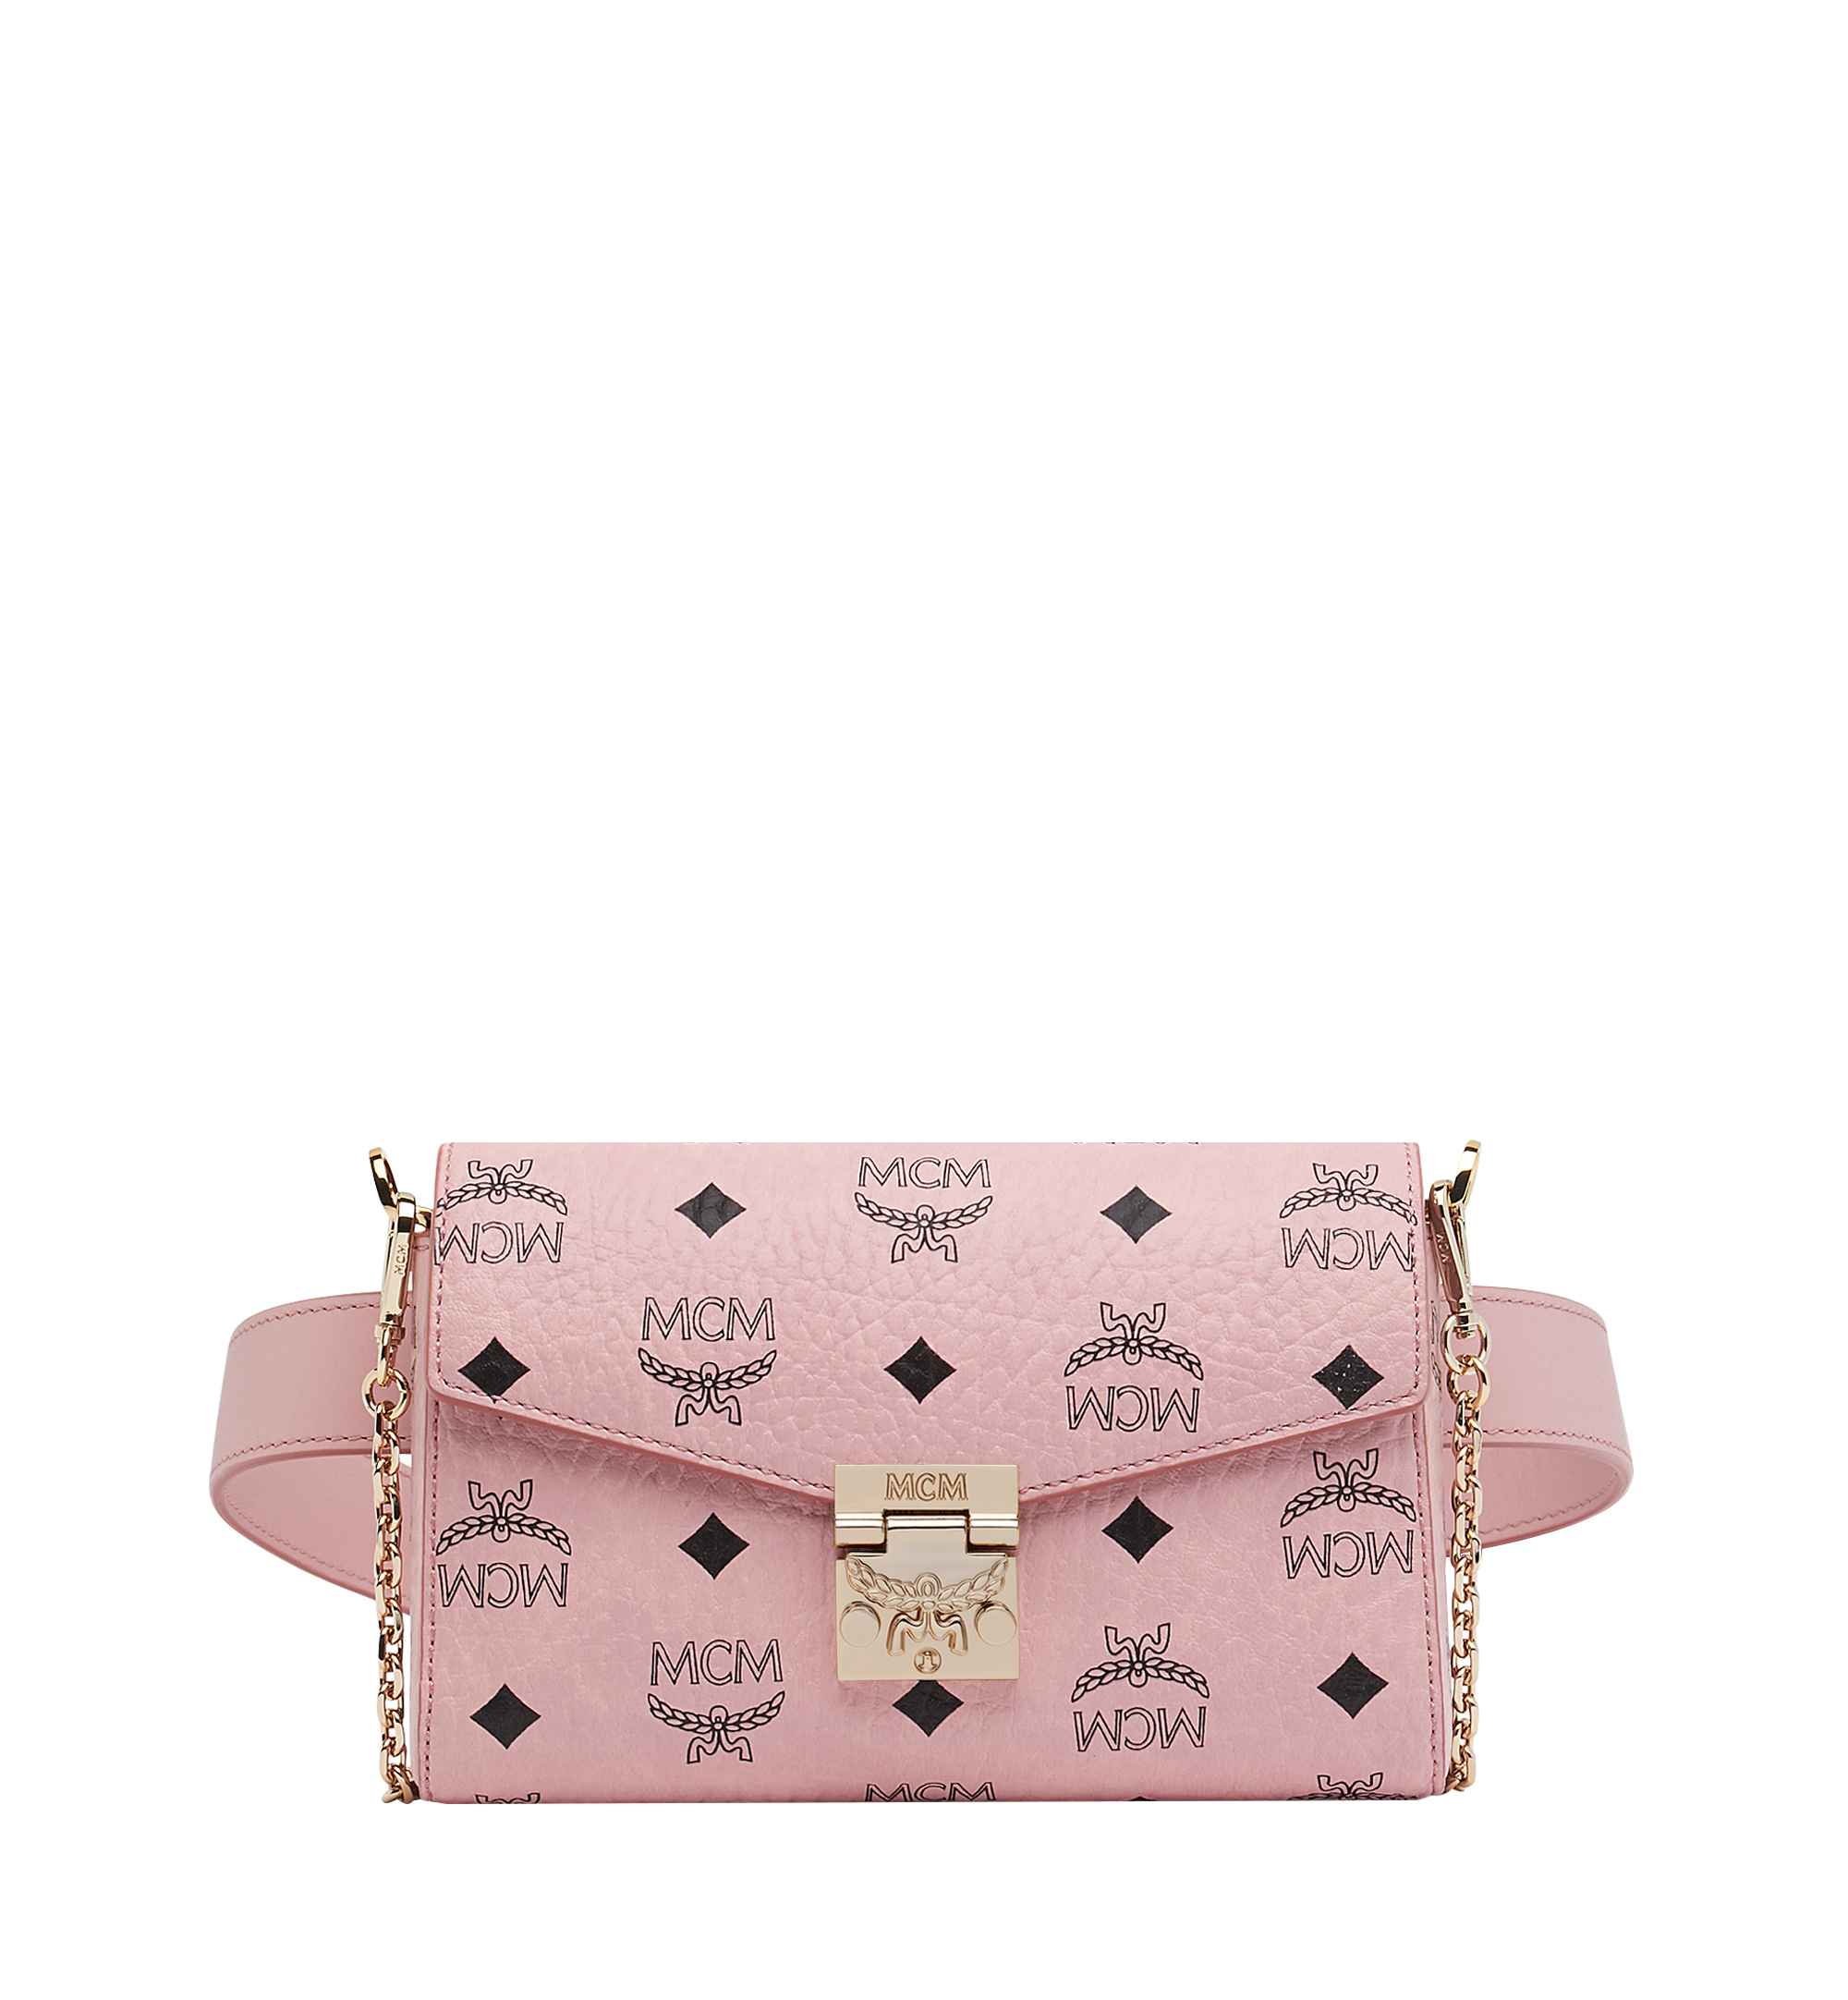 Mcm Belt Pink : White circle outlined in black with upwards pointing ...